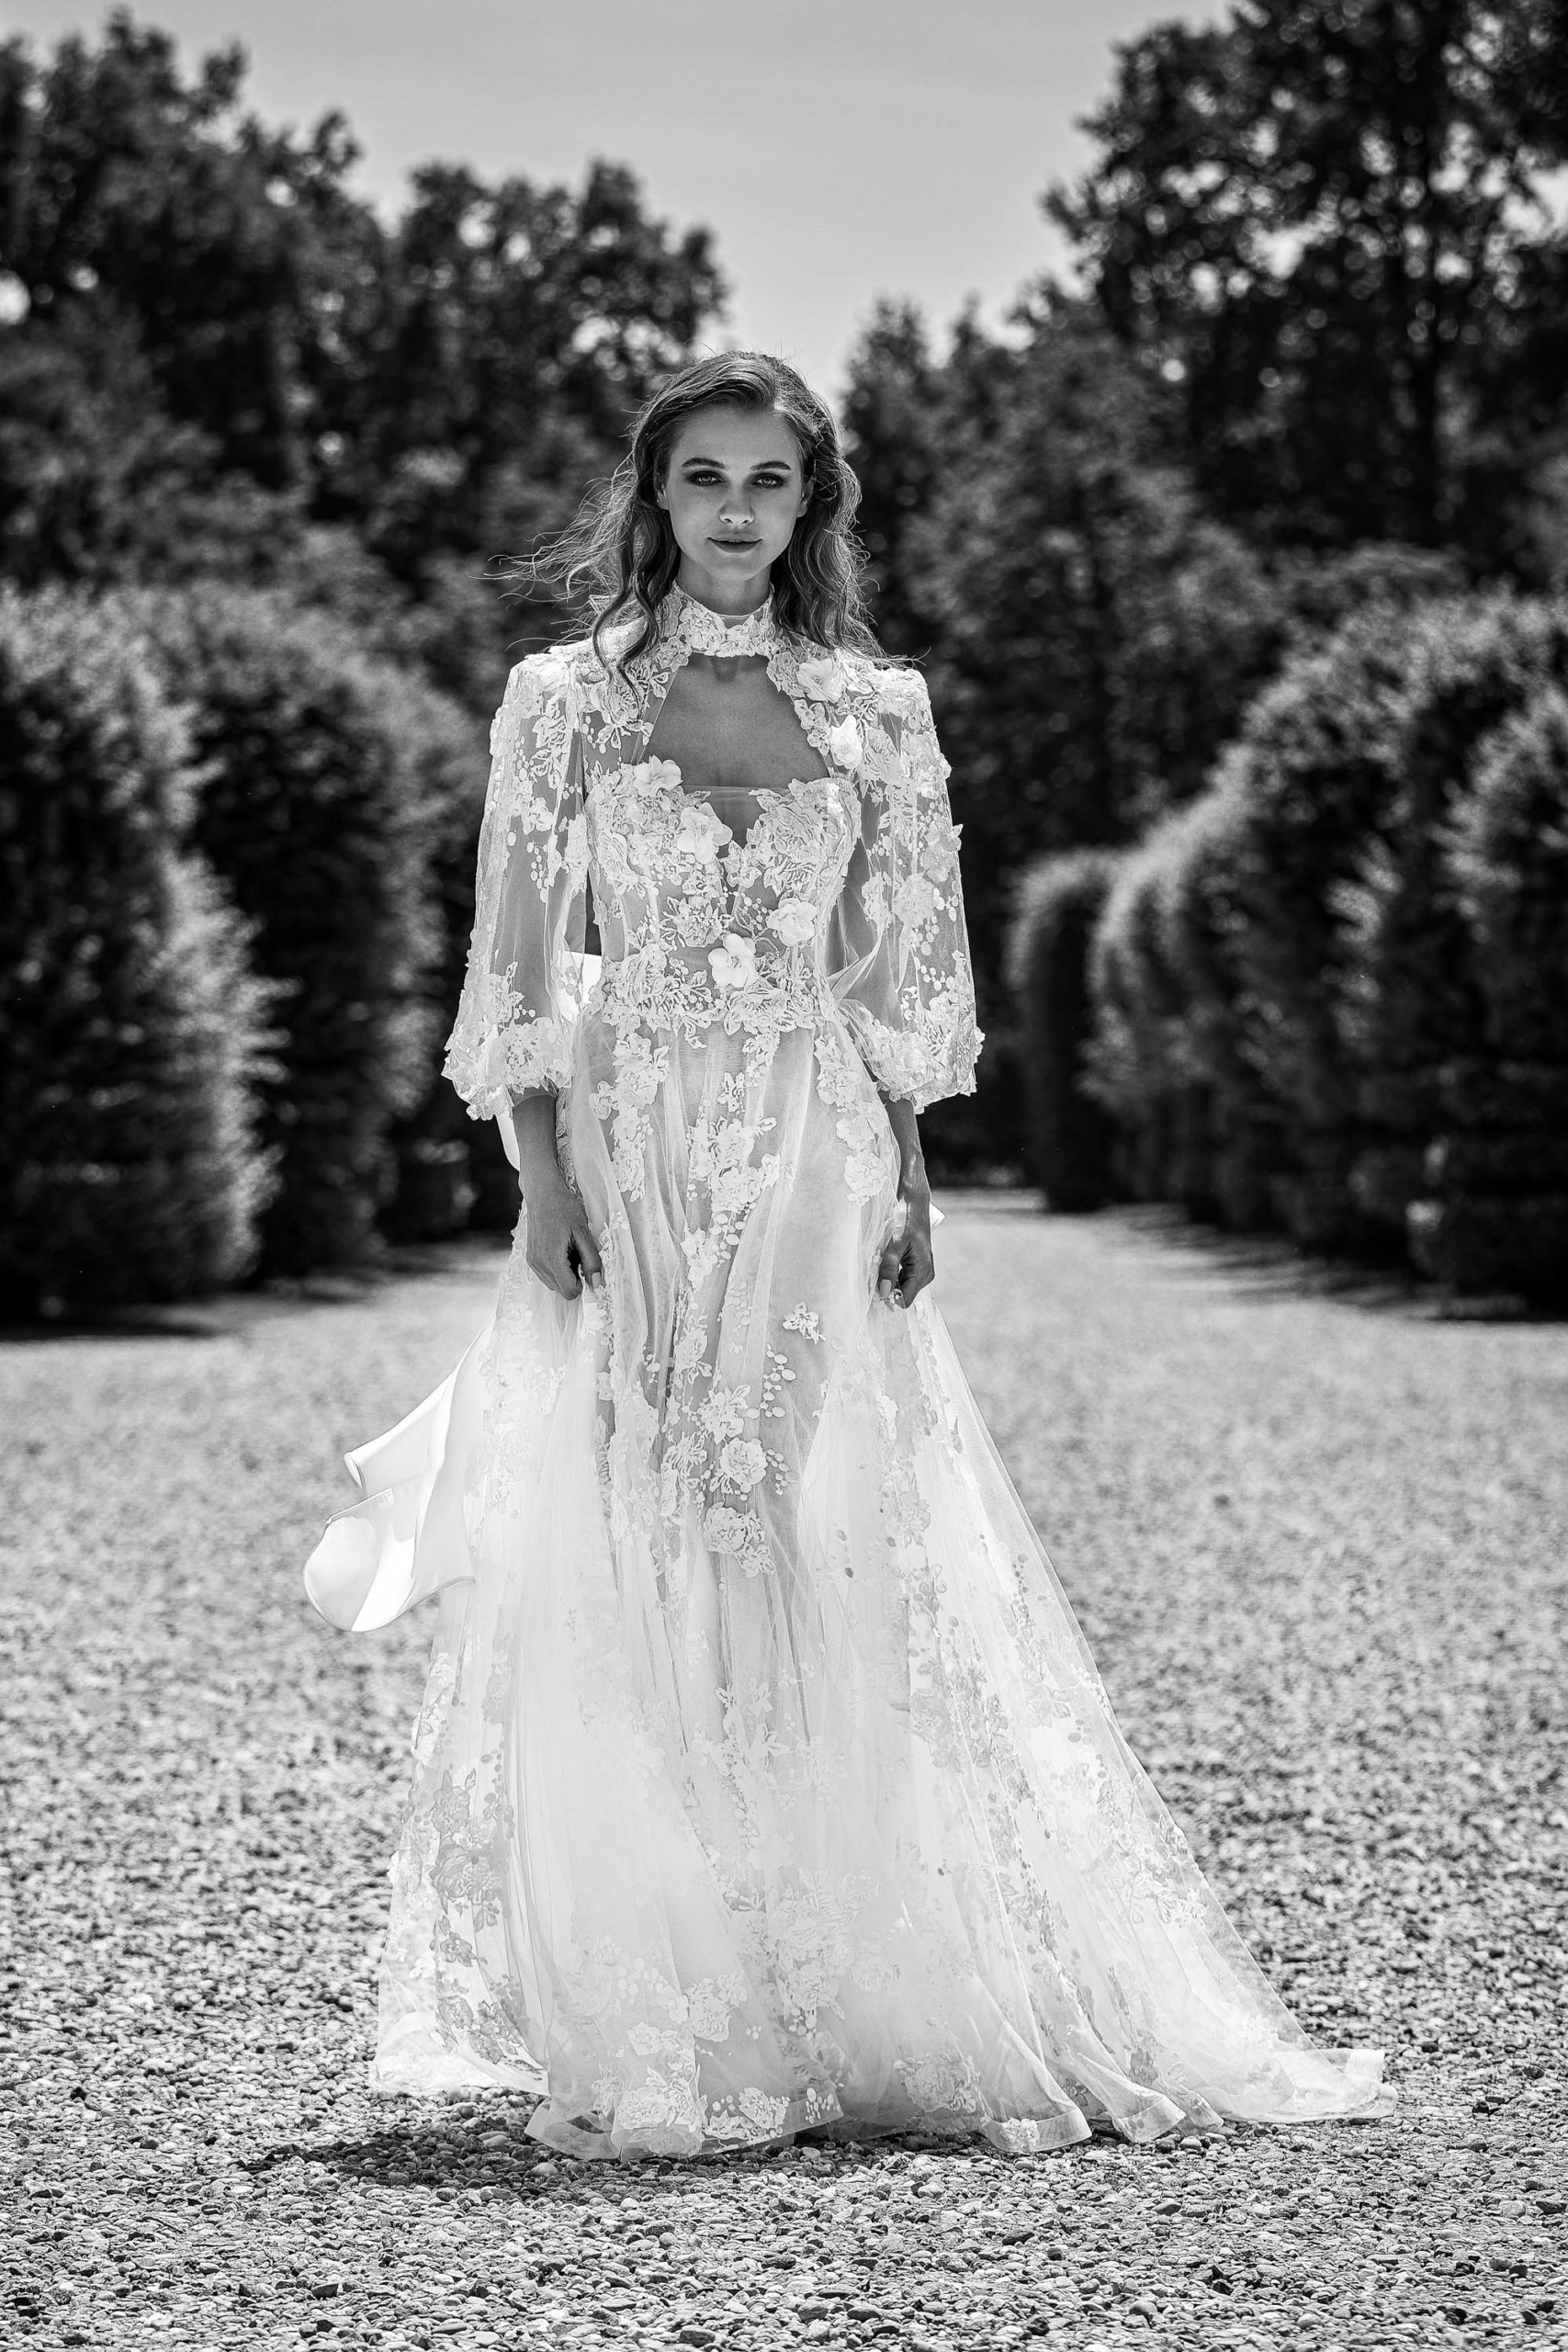 Paola Wedding Dresses: Vogue Style Inspirations for a Unique and Exclusive Bride - The art of choosing the perfect wedding dress